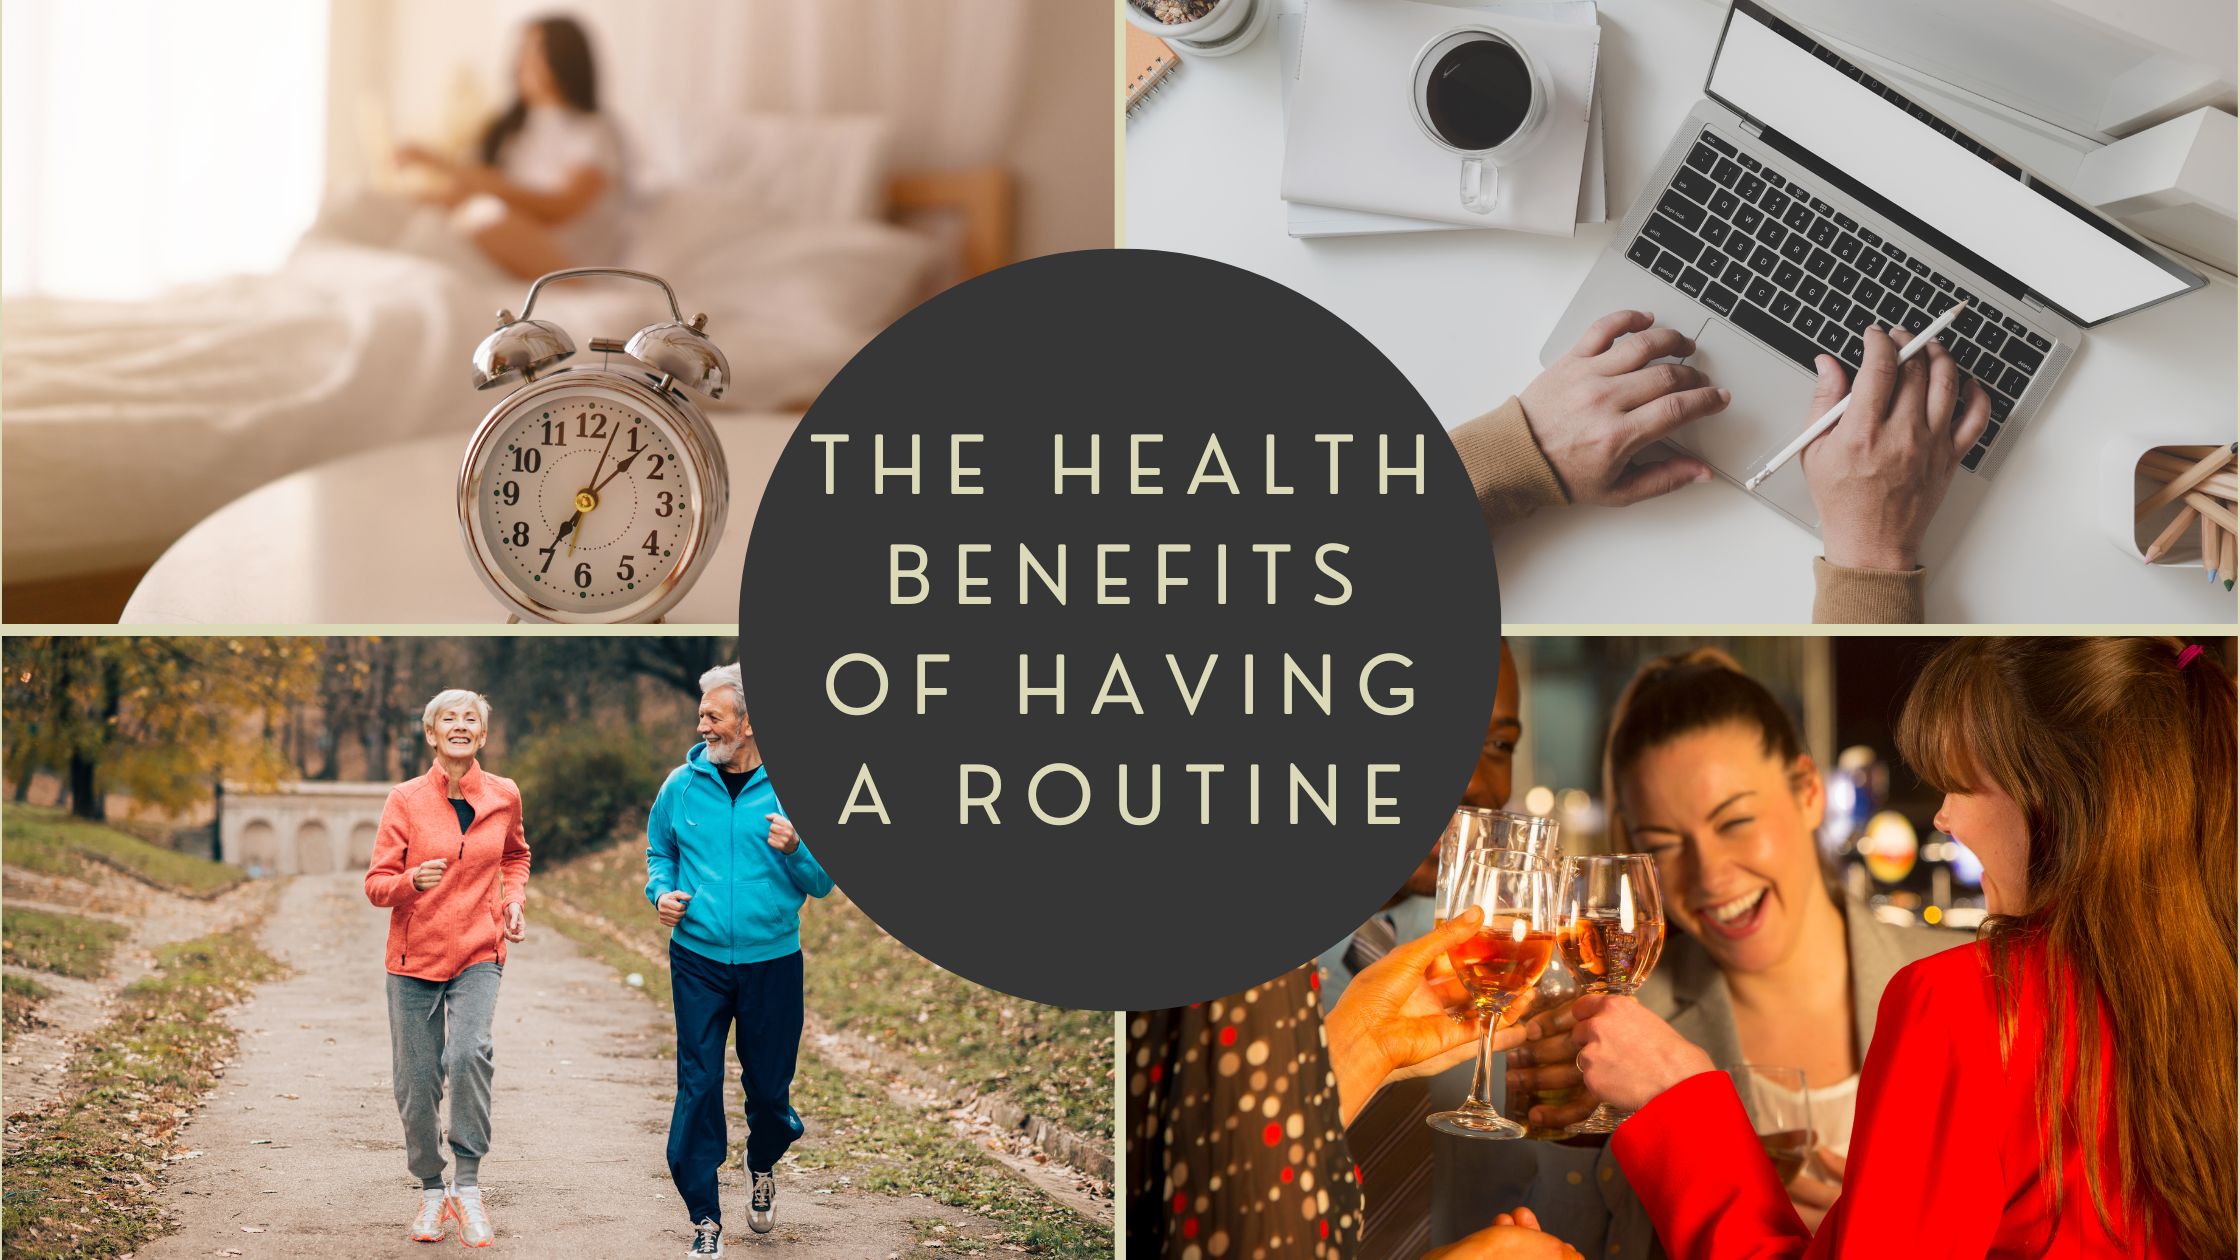 The health benefits of having a routine